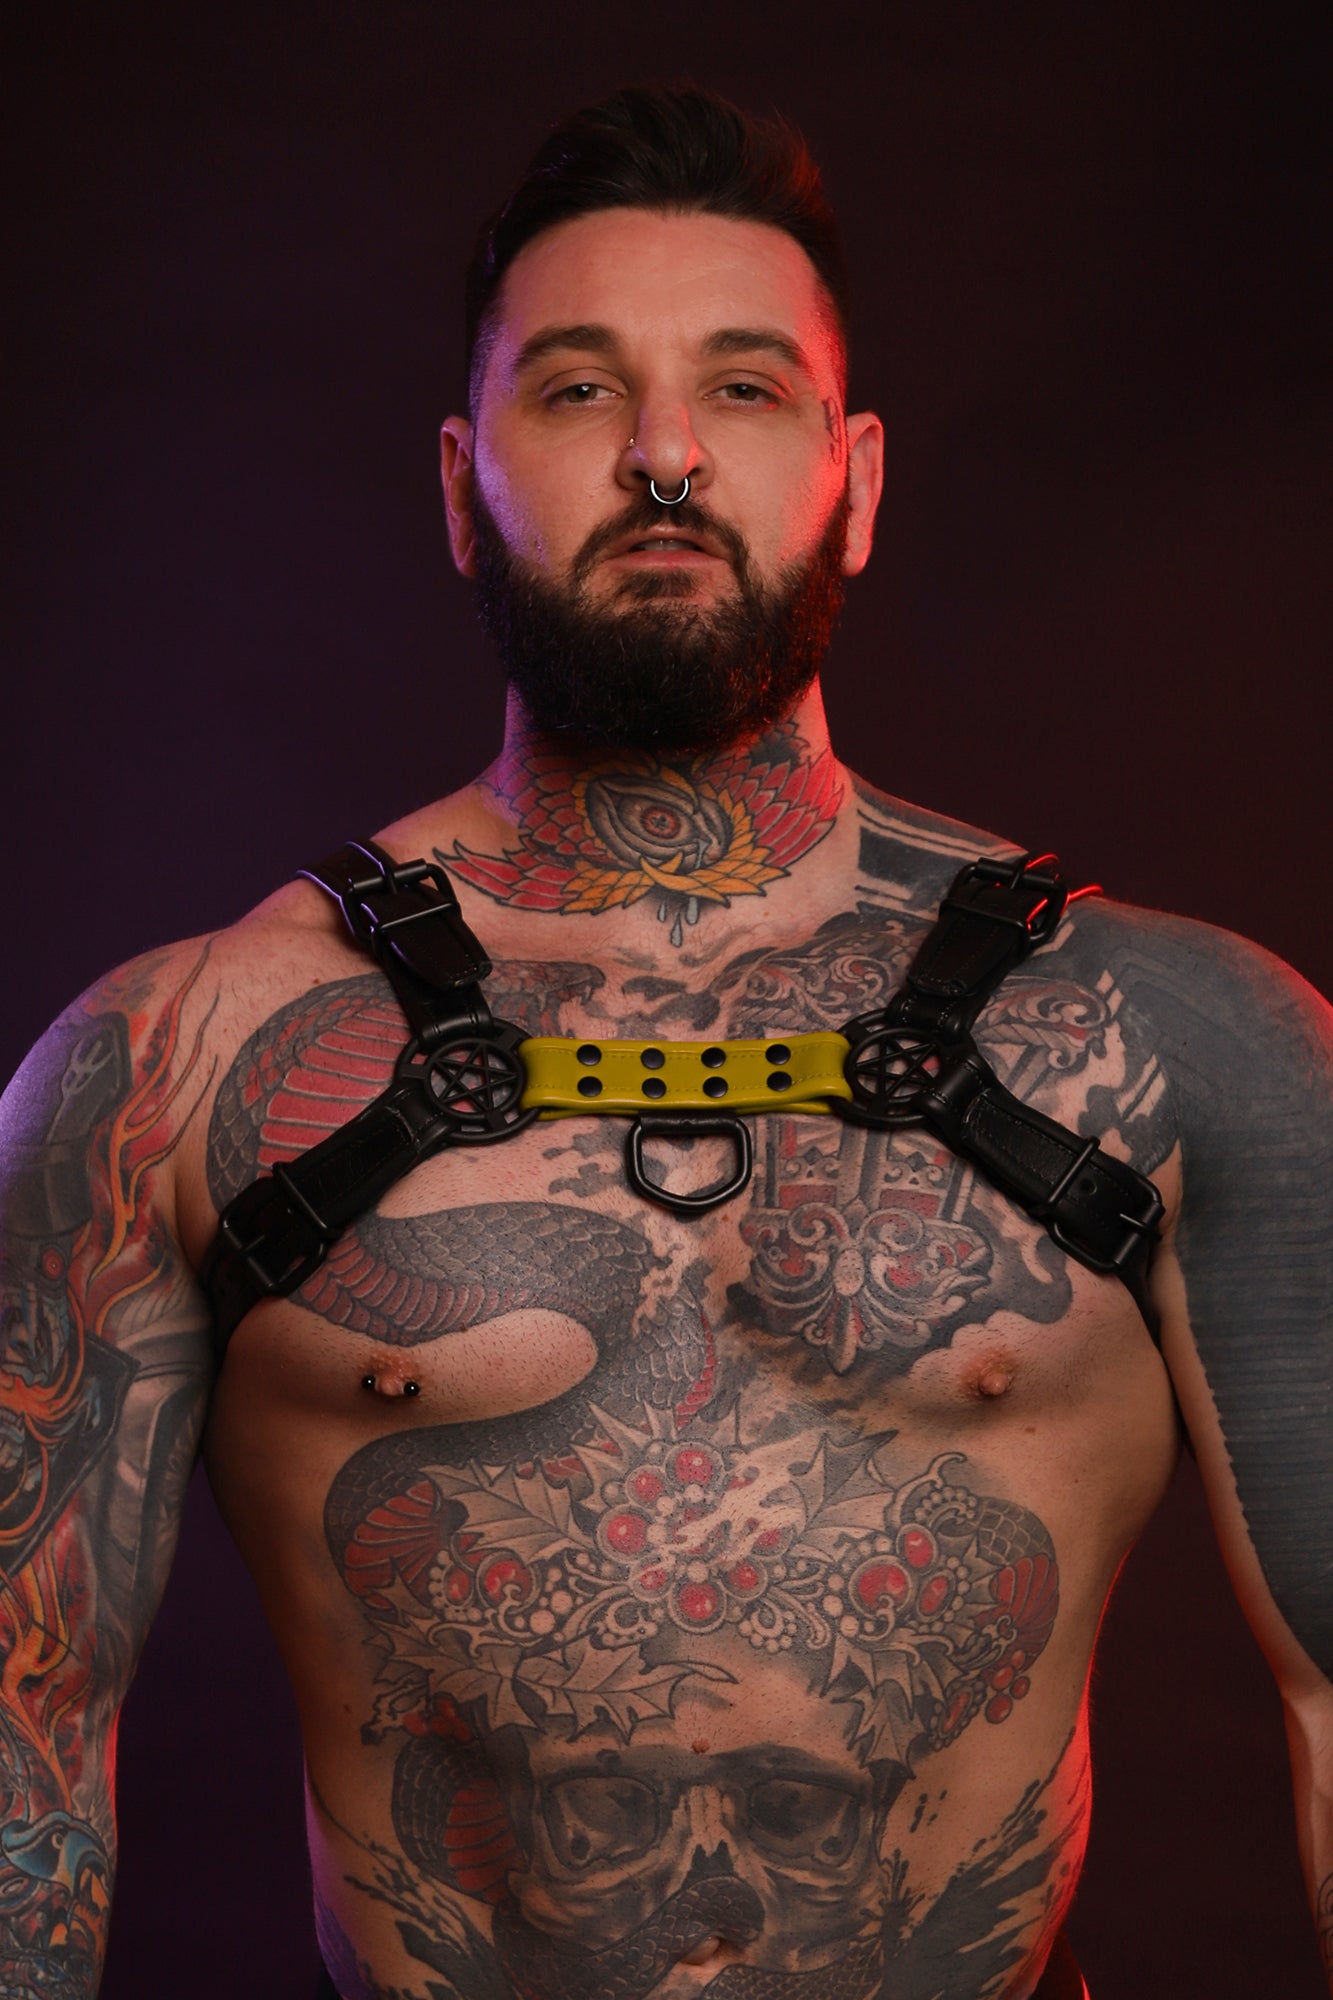 A product photo of a yellow Beast Harness by Twisted Beast.